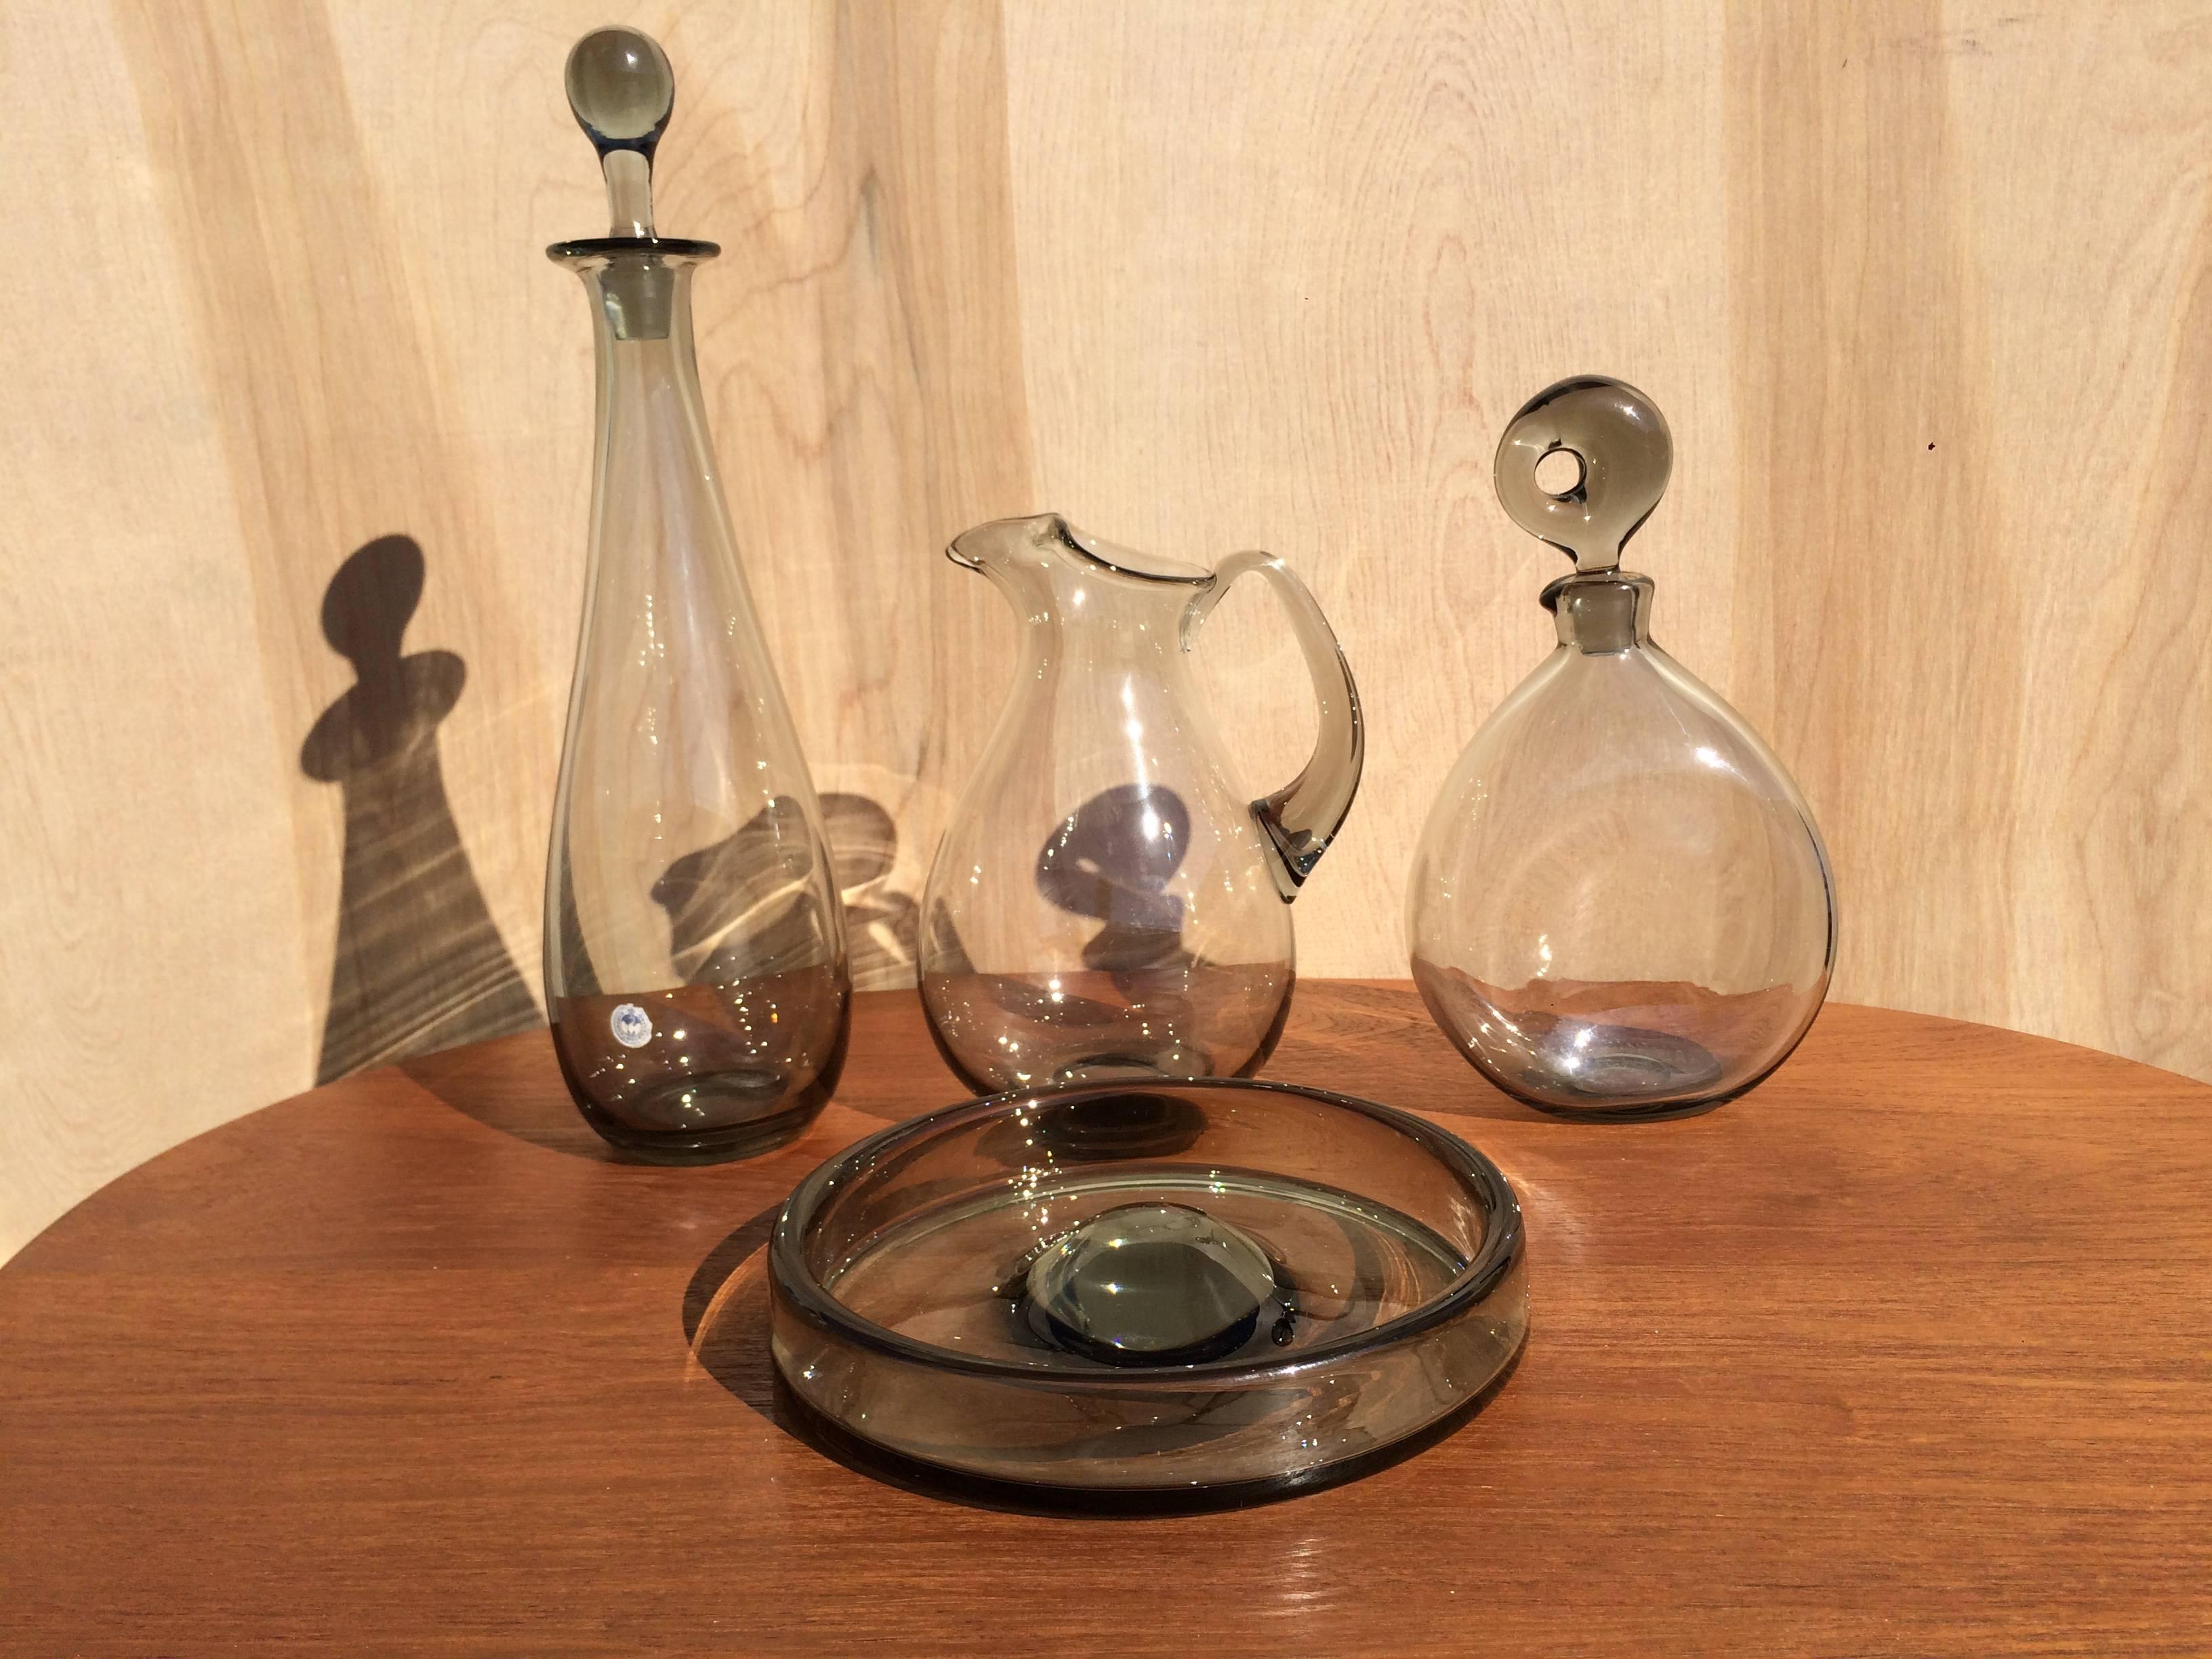 Serving set, one pitcher, two decanters and one dish.
Measures: Dish is 8.50